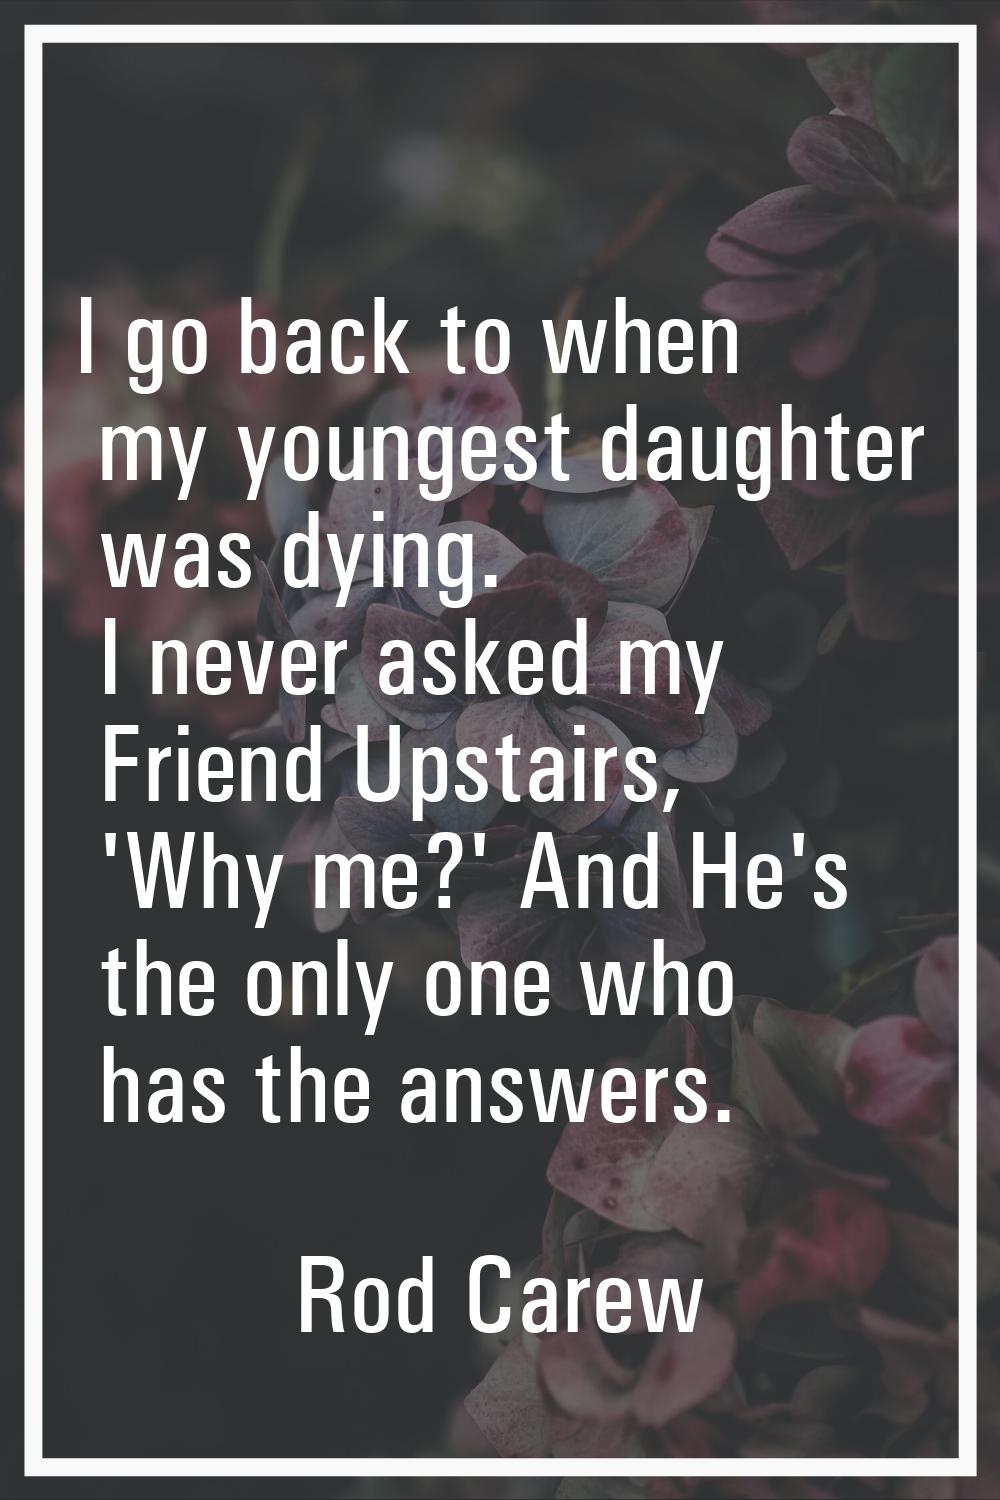 I go back to when my youngest daughter was dying. I never asked my Friend Upstairs, 'Why me?' And H